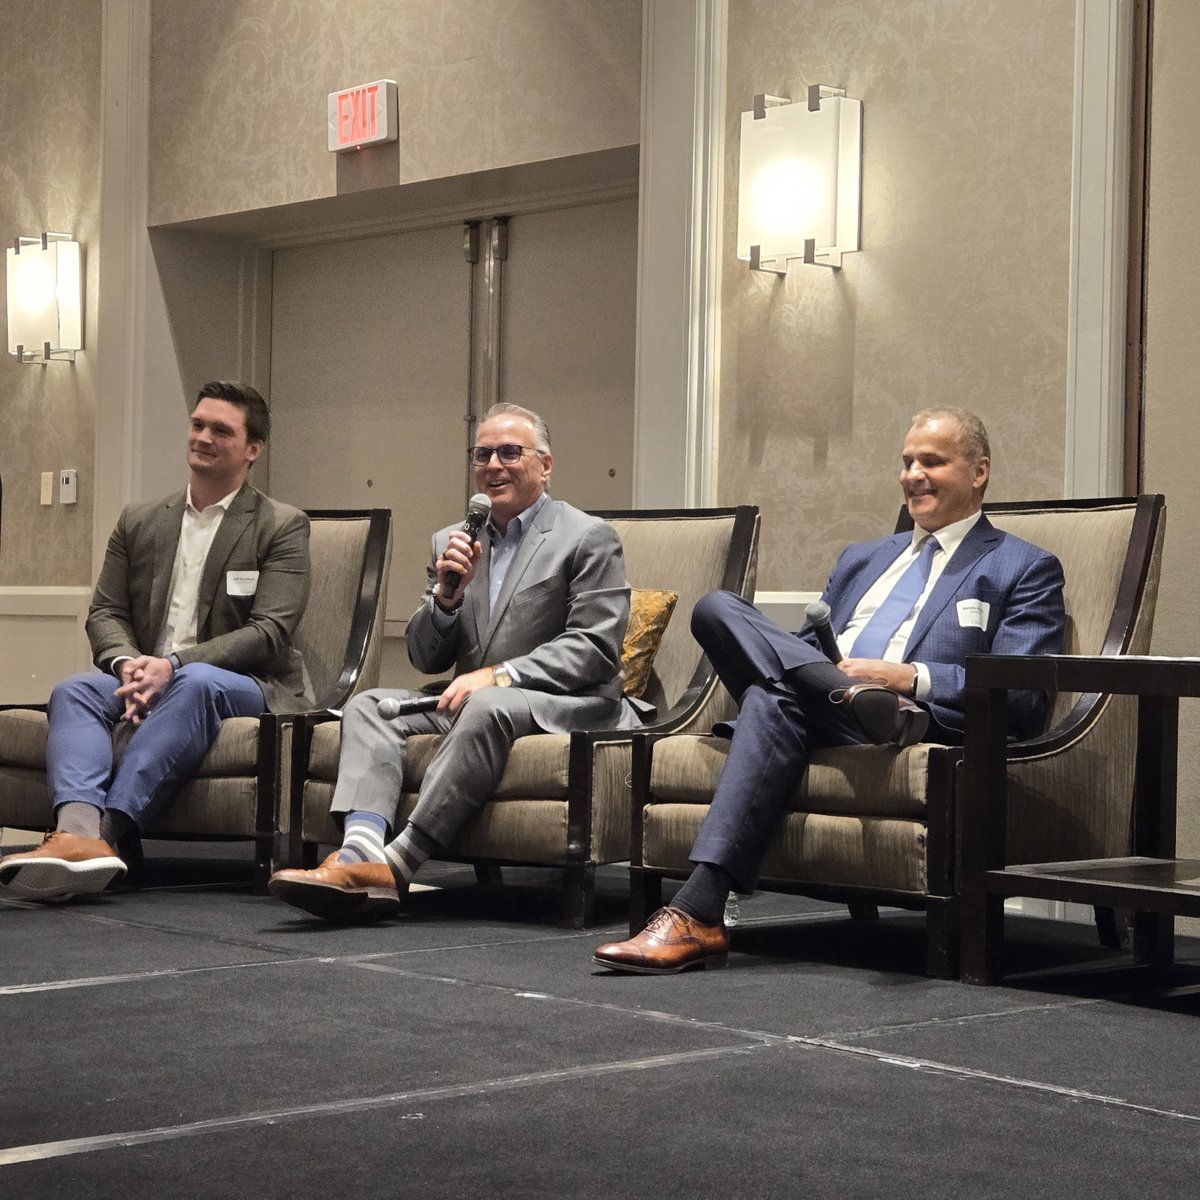 Thrilled to have participated in a panel by Metro #Detroit Chapter of #NABIP. #ThankYou for the opportunity to share & discuss #MemberEngagement, #CommunityHealth & driving quality while navigating market shifts in #Michigan. #QualityCare #HealthcarePartnerships